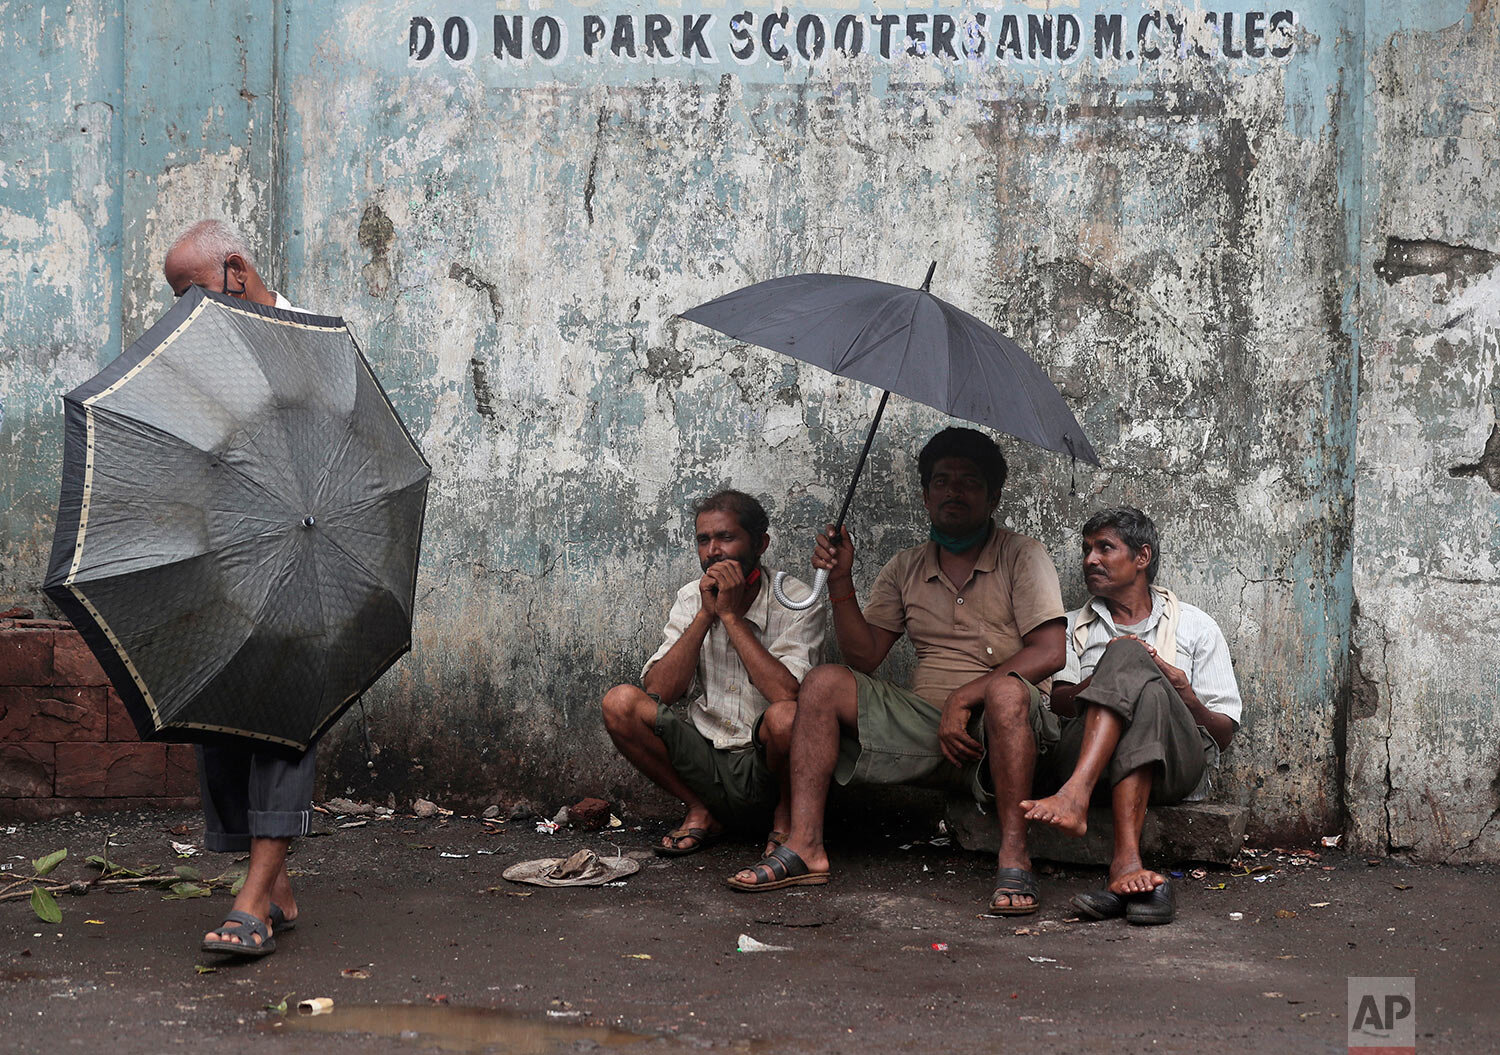  Daily wage laborers wait to be employed for the day, on a street in Mumbai, India, Friday, June 11, 2021. (AP Photo/Rafiq Maqbool) 